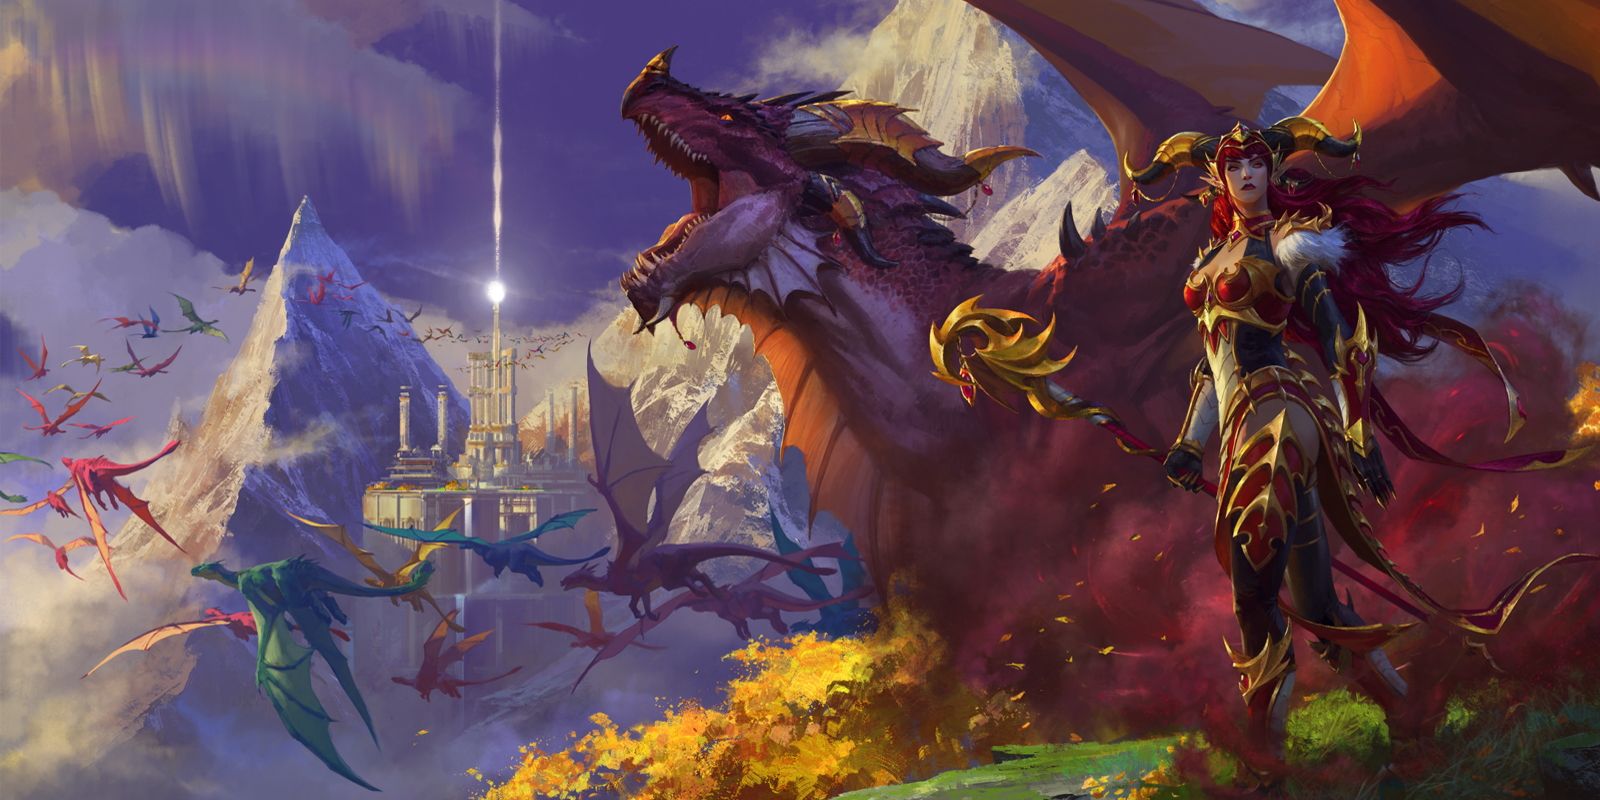 Cover image of the World of Warcraft Dragonflight expansion, featuring Alexstrasza standing next to a dragon and watching hundreds of dragons fly toward a city above the mountains